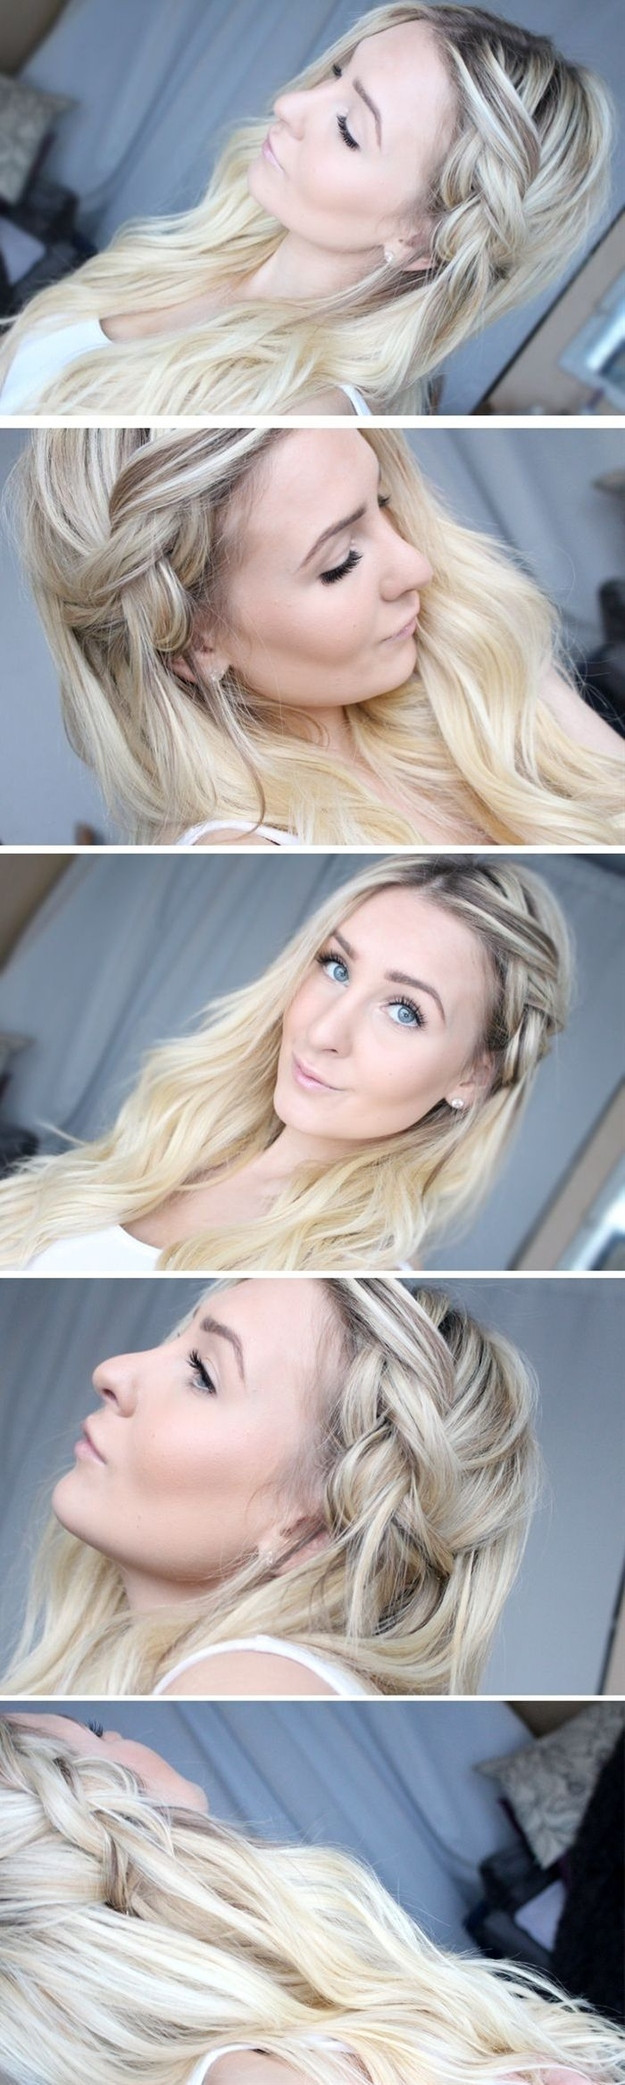 Lazy Girl Hairstyles
 9 Lazy Girls Hairstyle Hacks To Try Elle Hairstyles